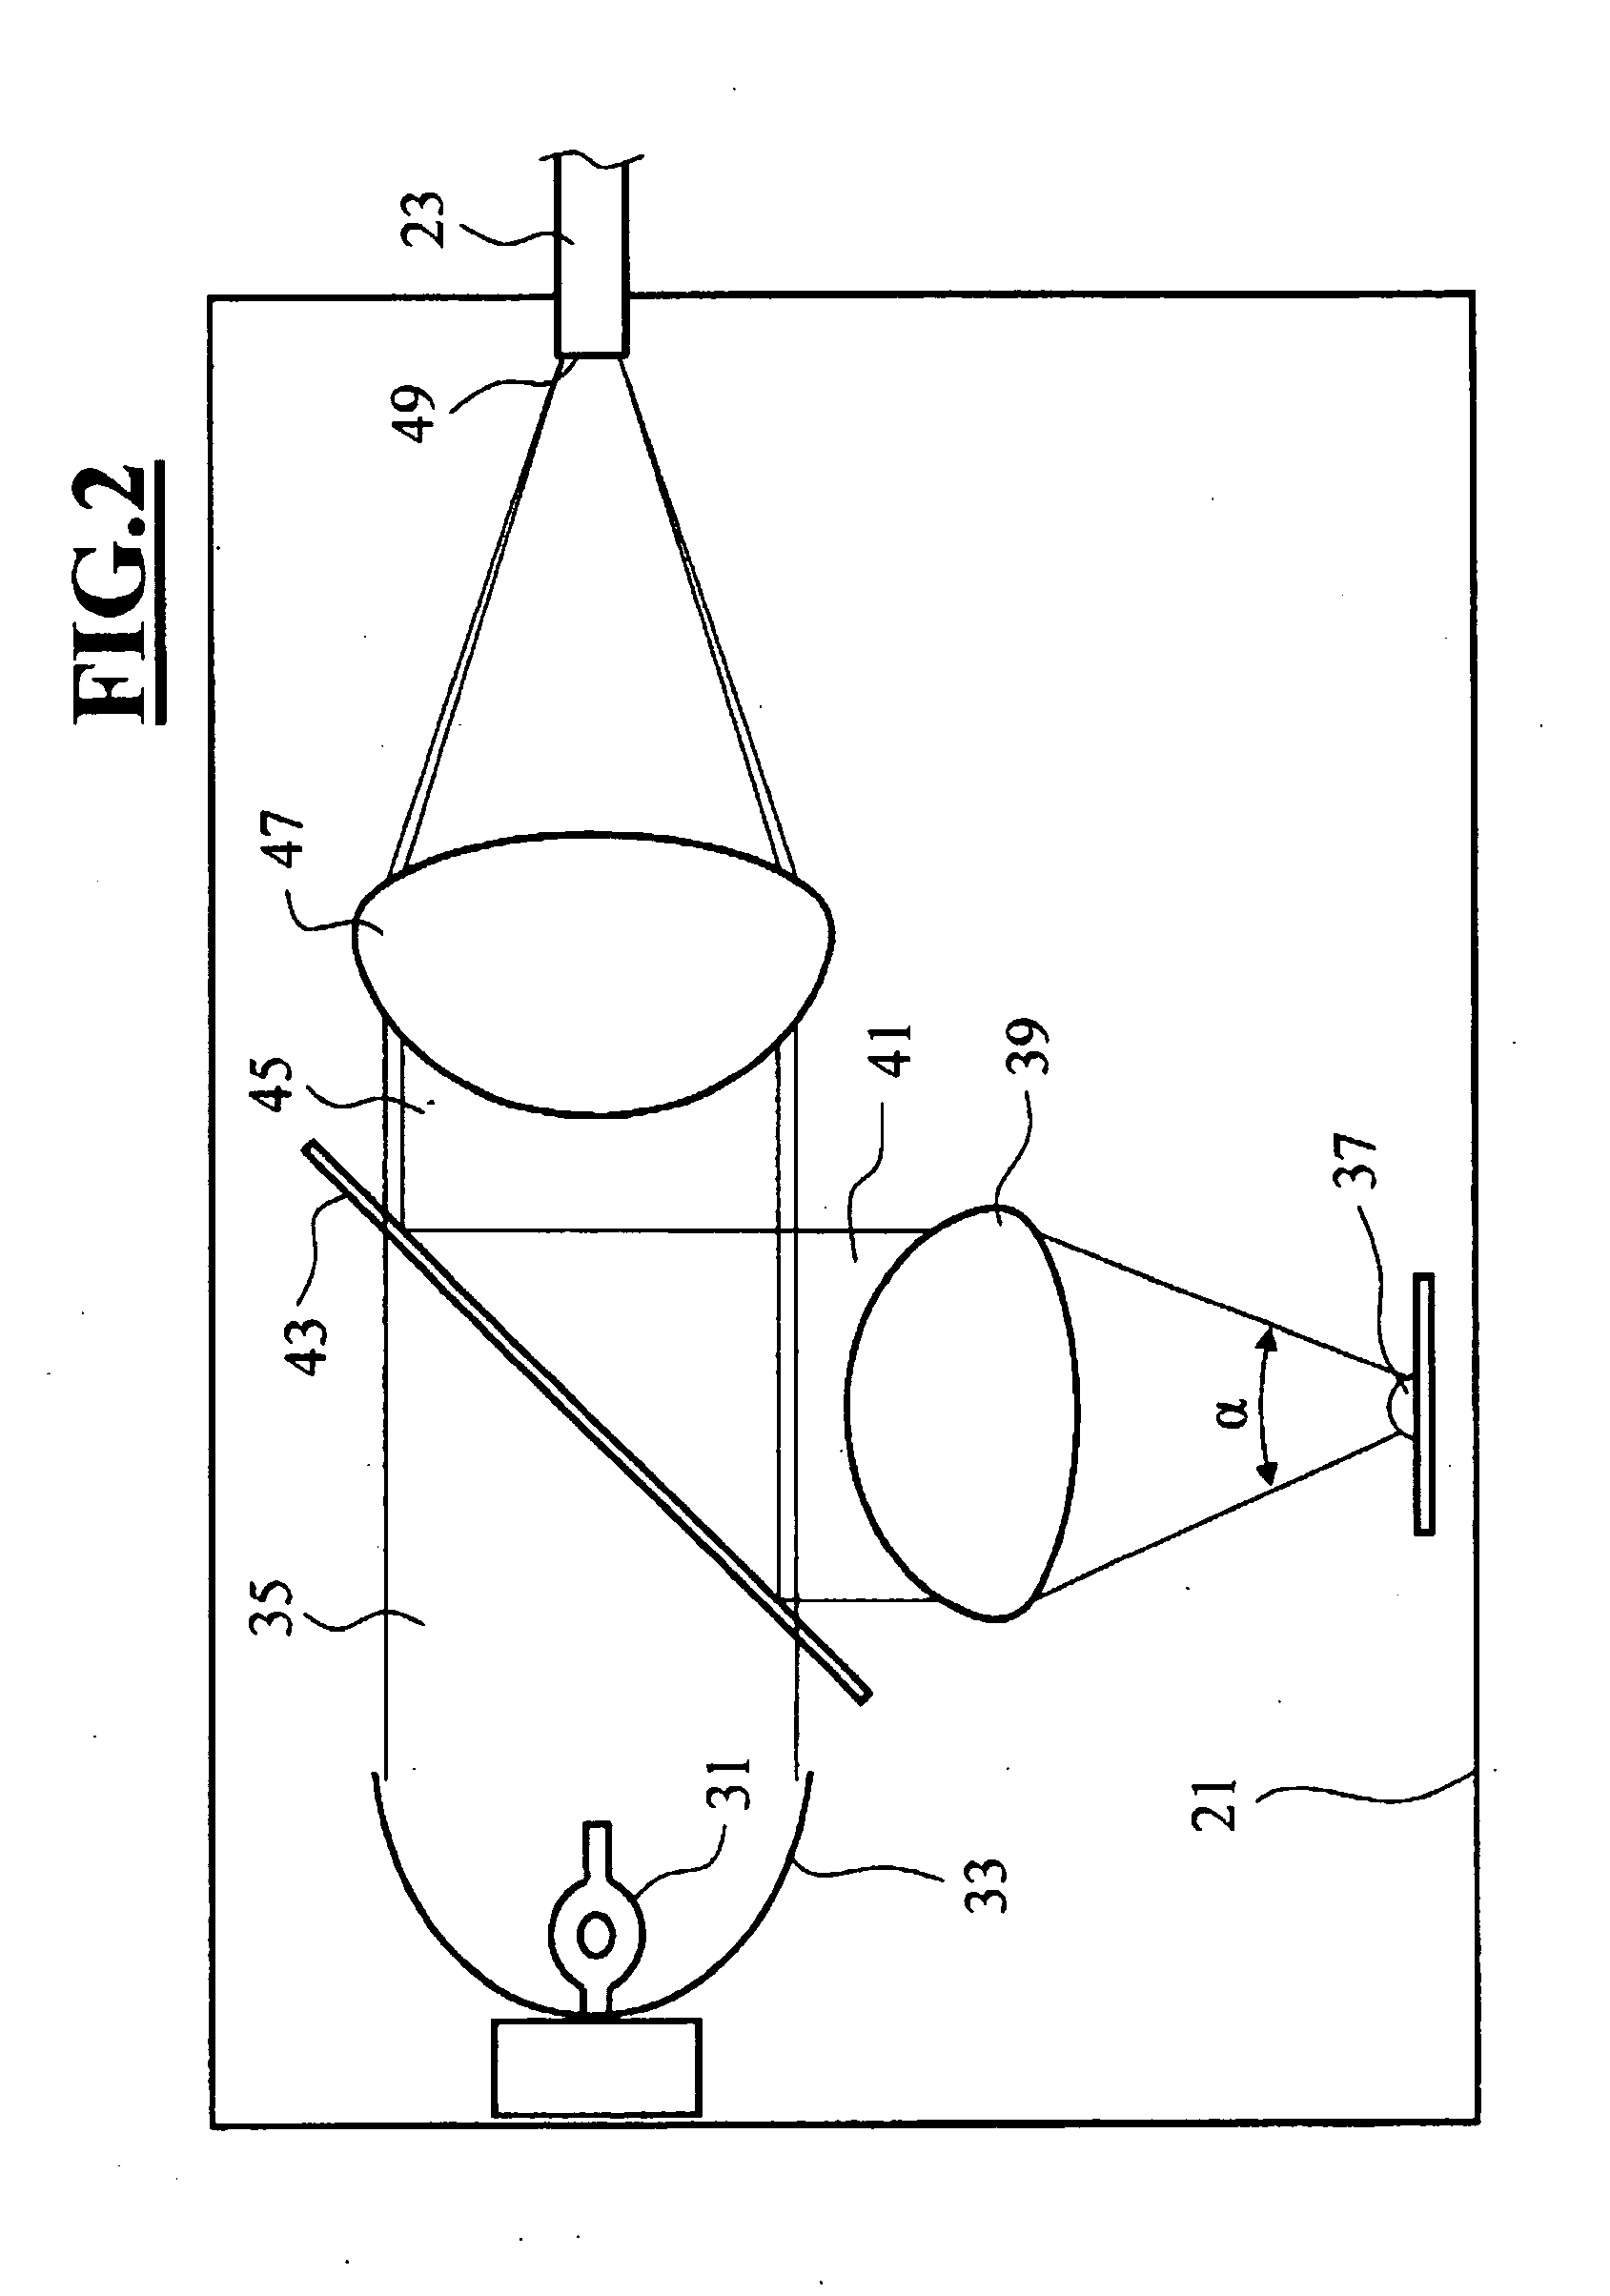 Illuminating system and an optical viewing apparatus incorporating said illuminating system